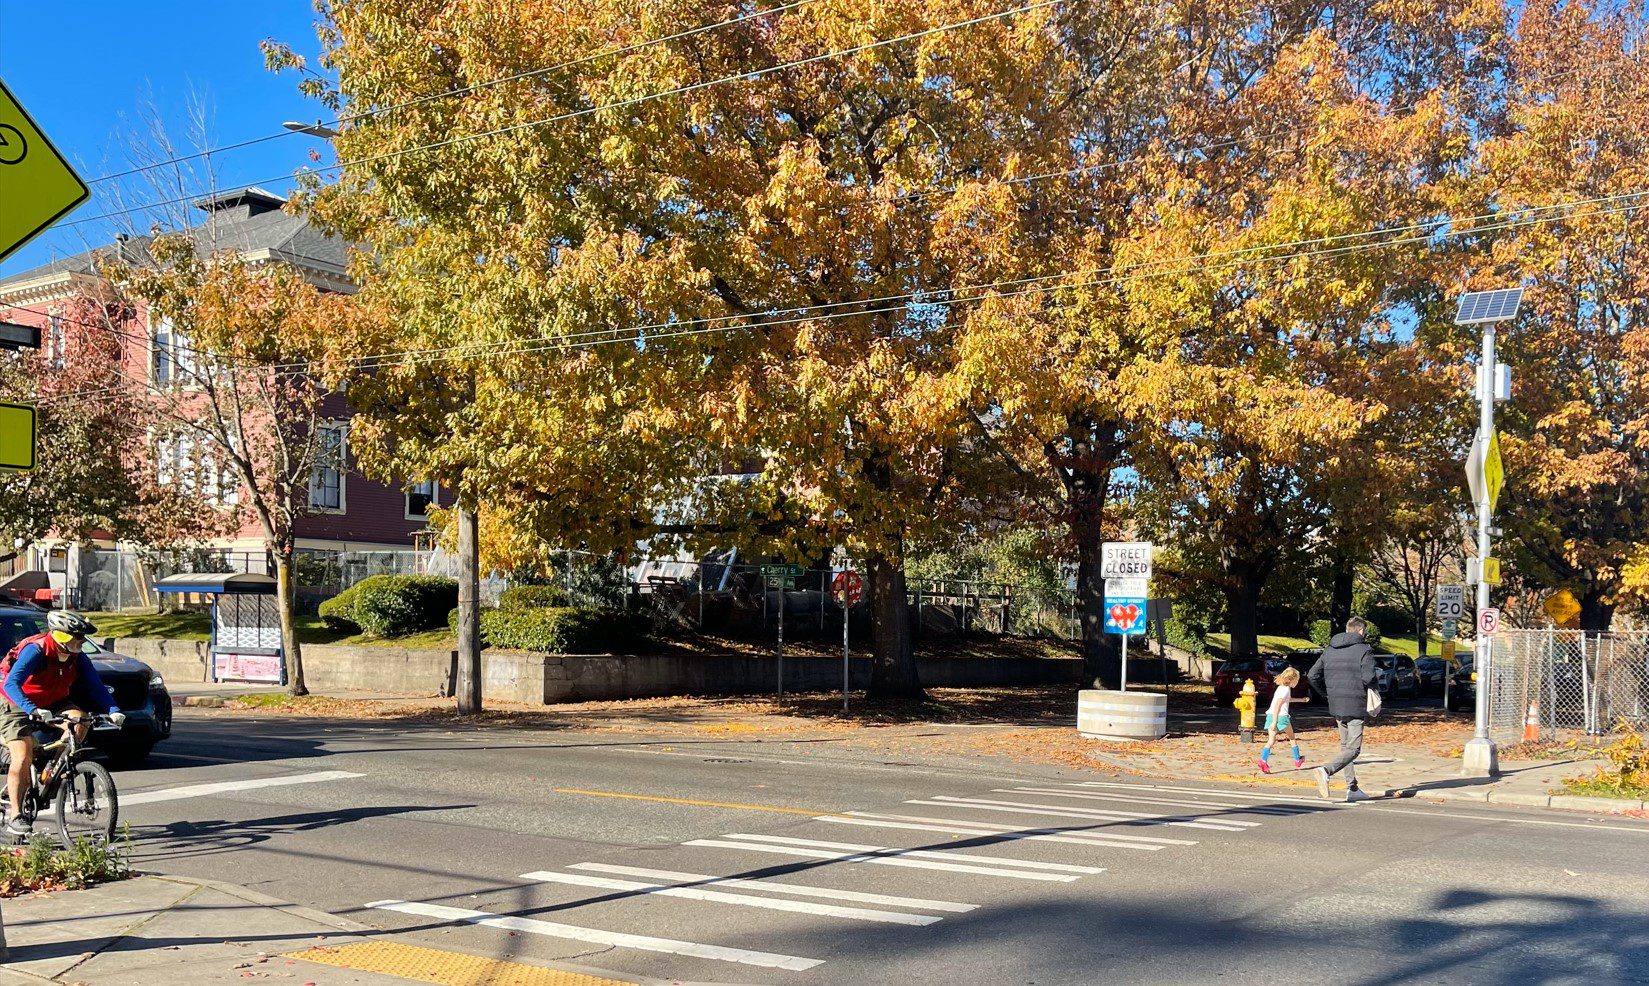 People cross the street while a person biking and person driving wait to pass, on a crisp sunny fall day.